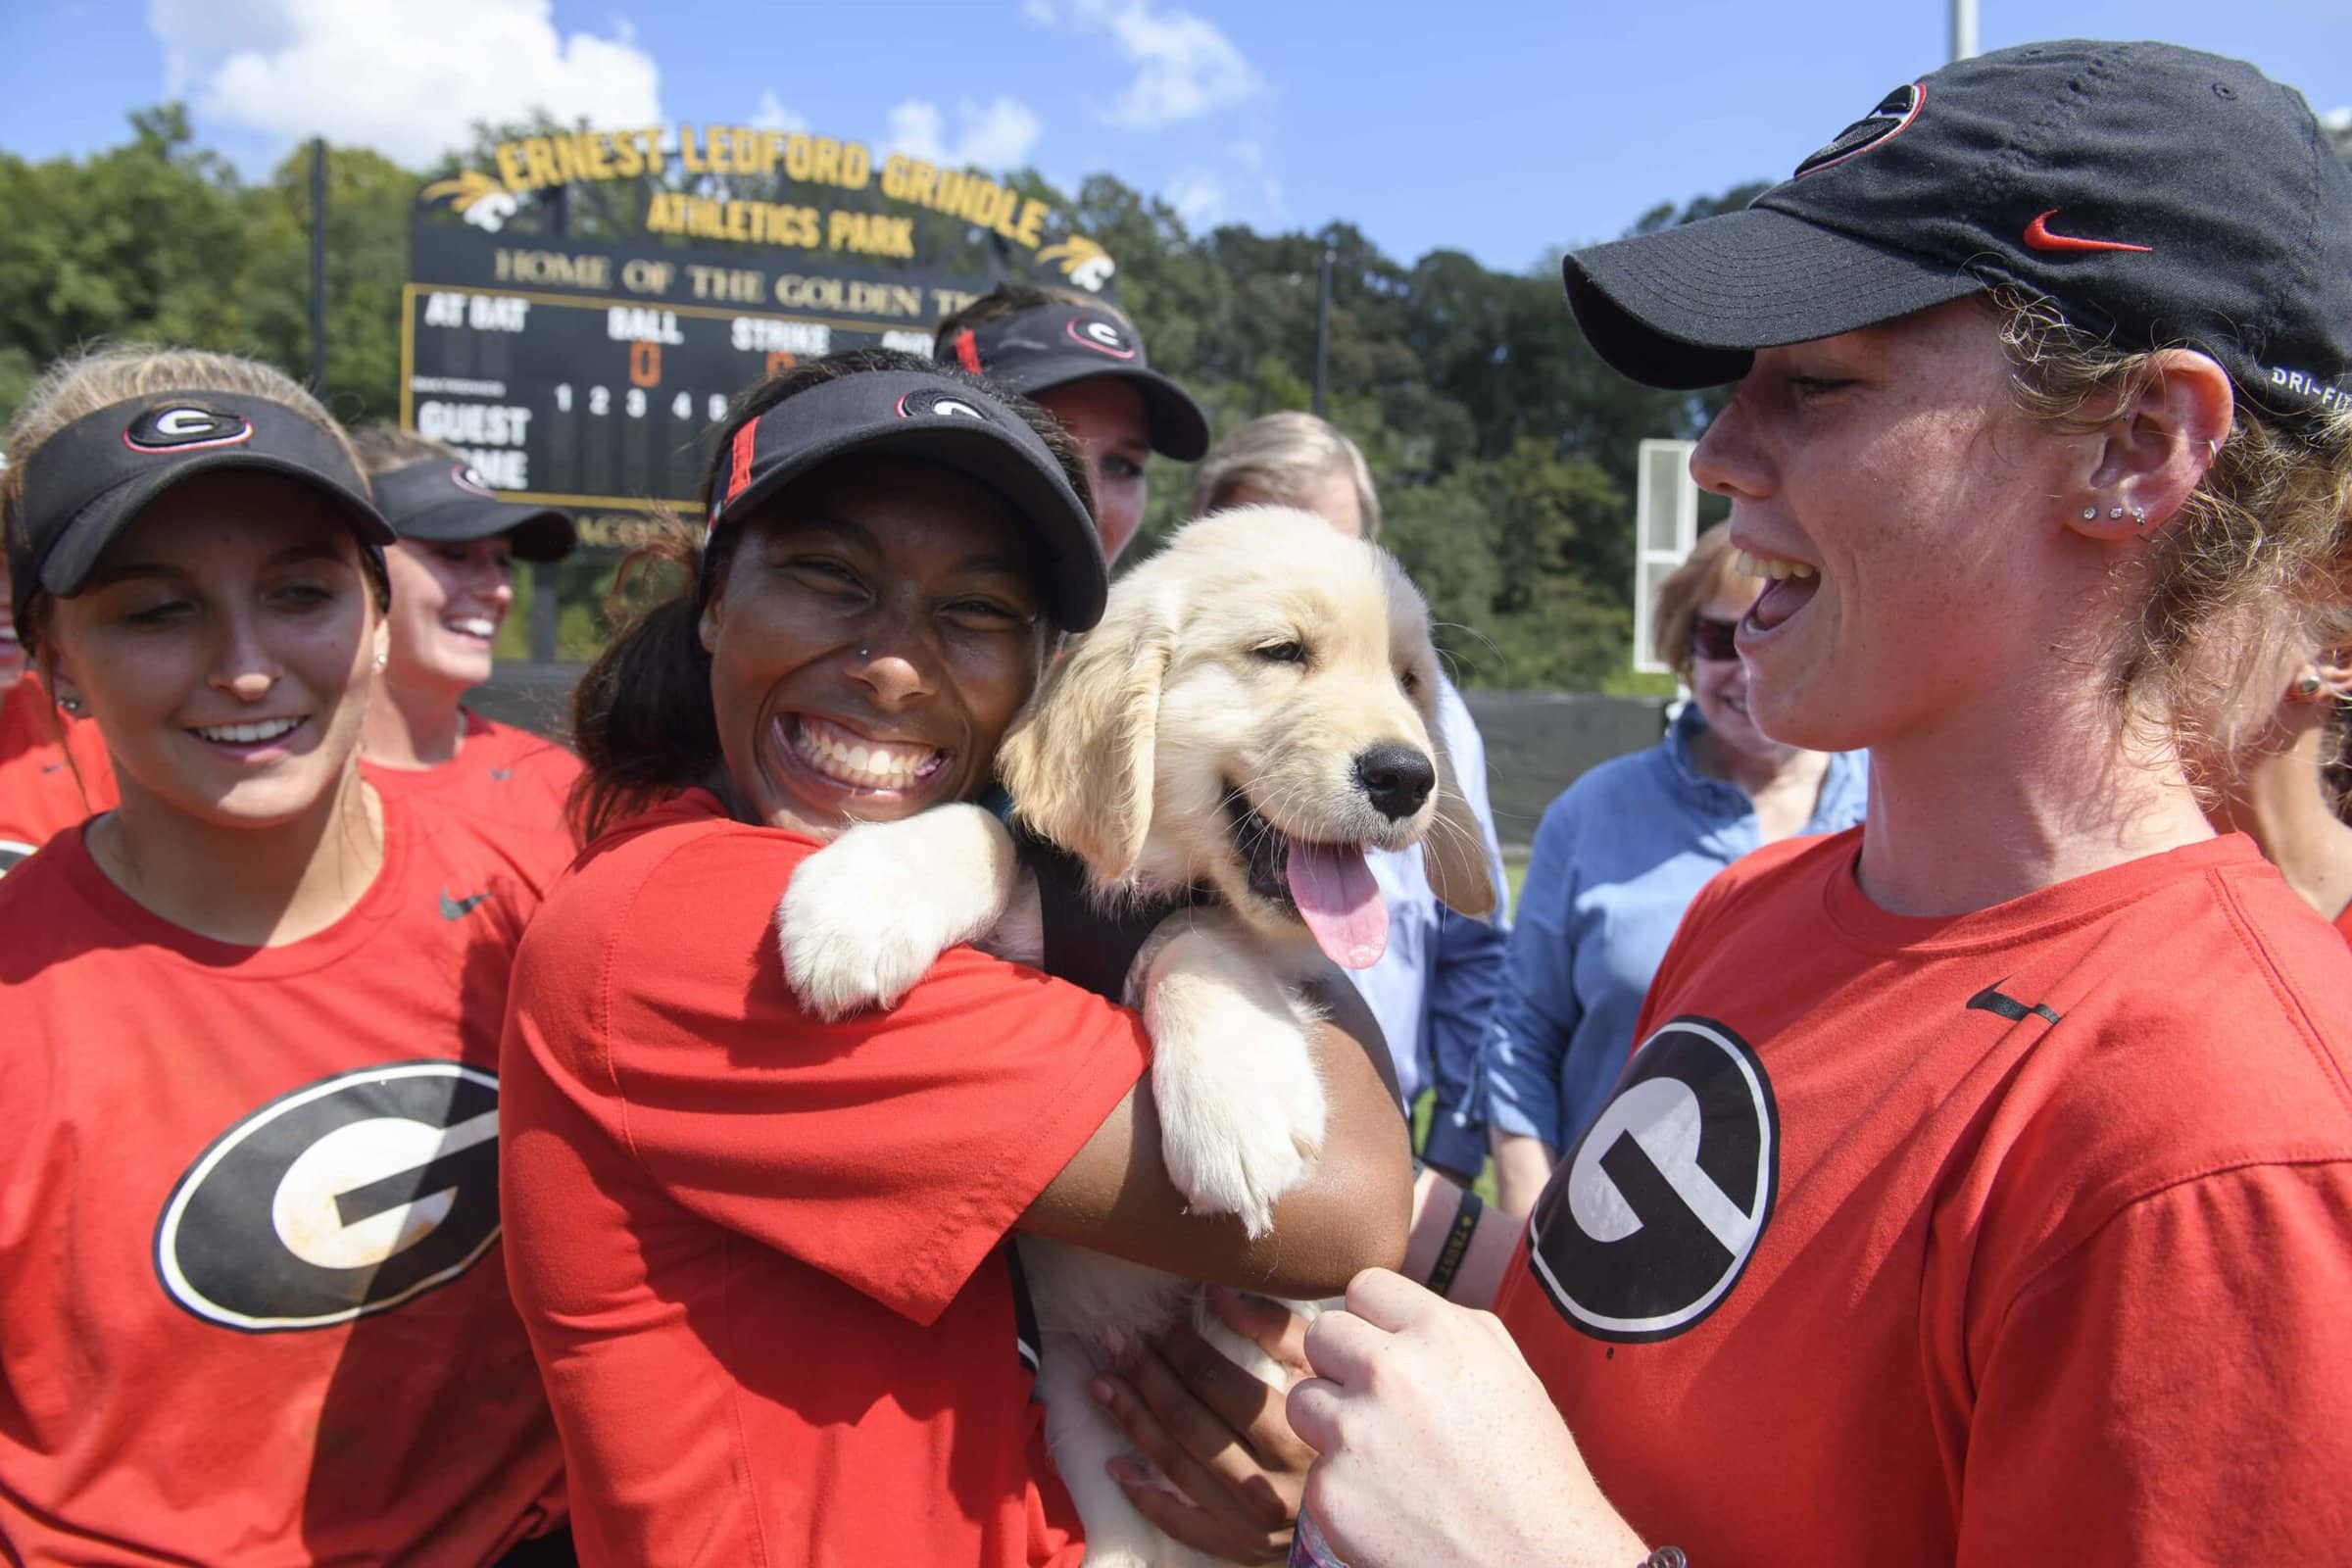 Members of the Georgia softball team meet Max, Doug and Kay Ivester's 10 week old golden retriever puppy, between games of a doubleheader with Brenau at Pacolet Milliken Field at the Ernest Ledford Grindle Athletics Park. (AJ Reynolds/Brenau University)